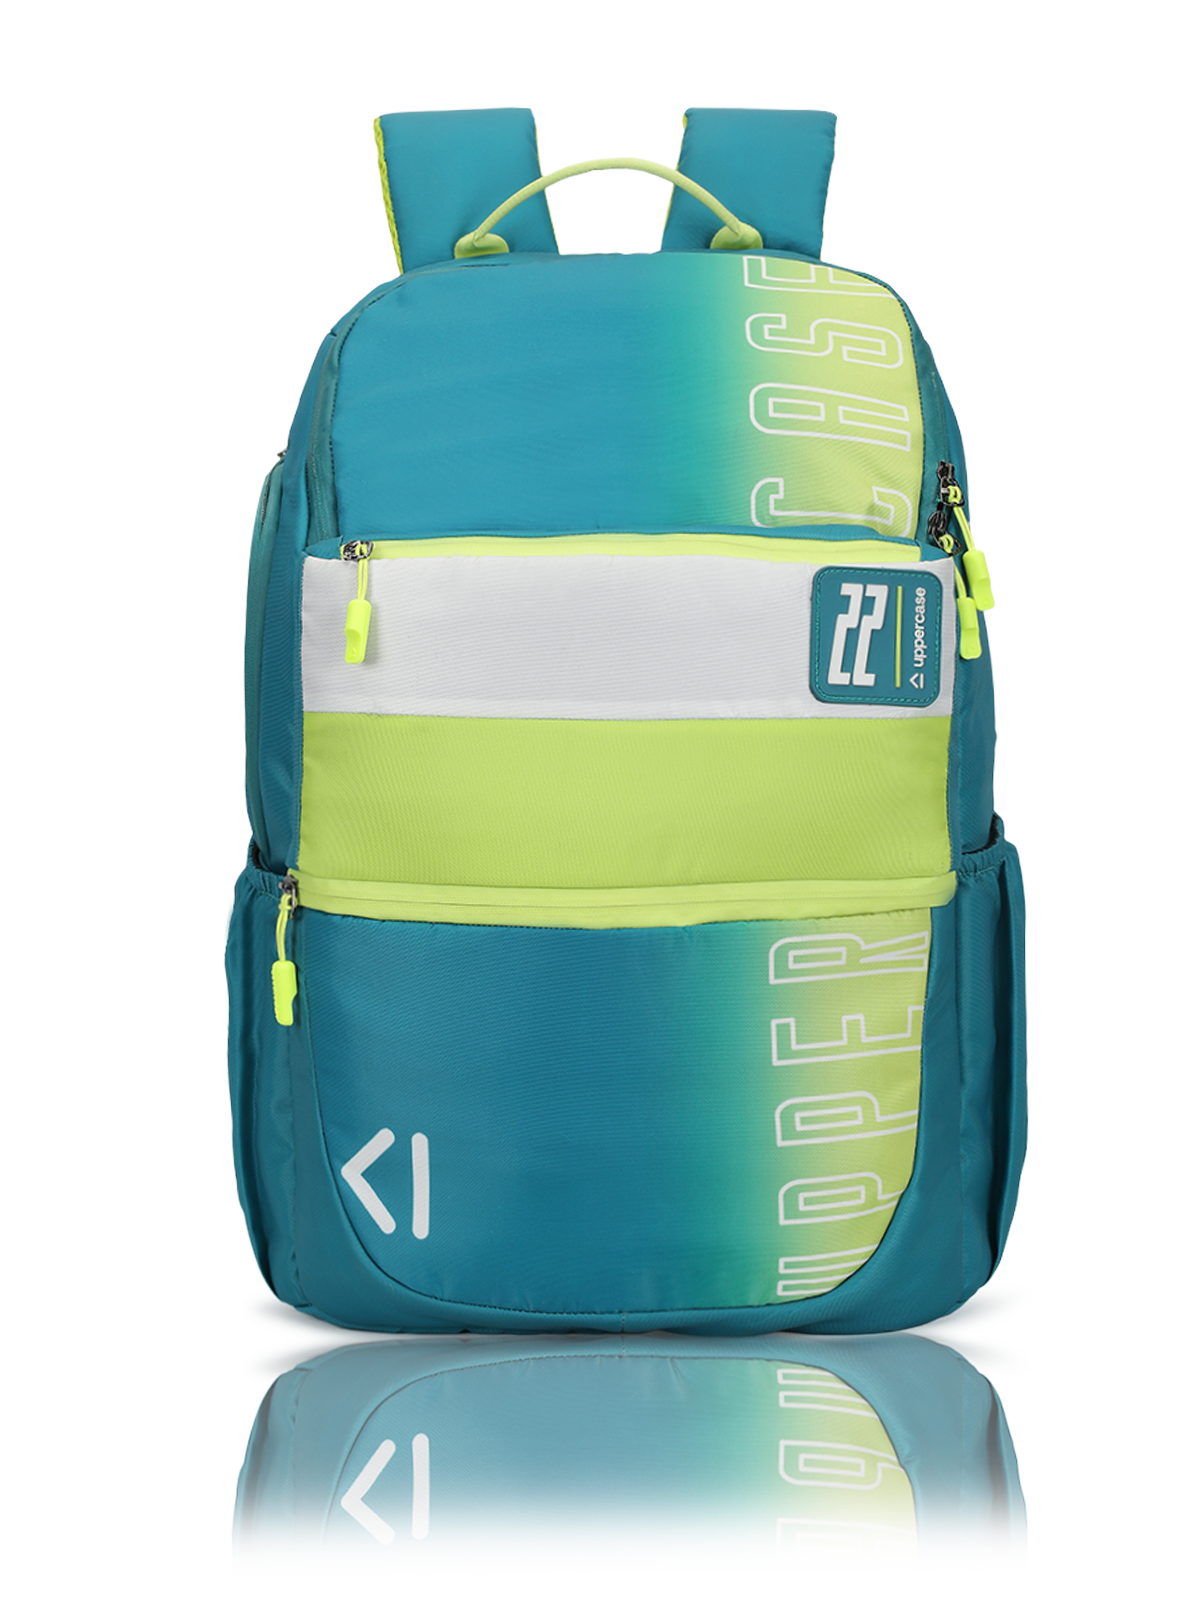 uppercase Campus 04 Backpack Double Compartment School Bag 33L Teal Blue